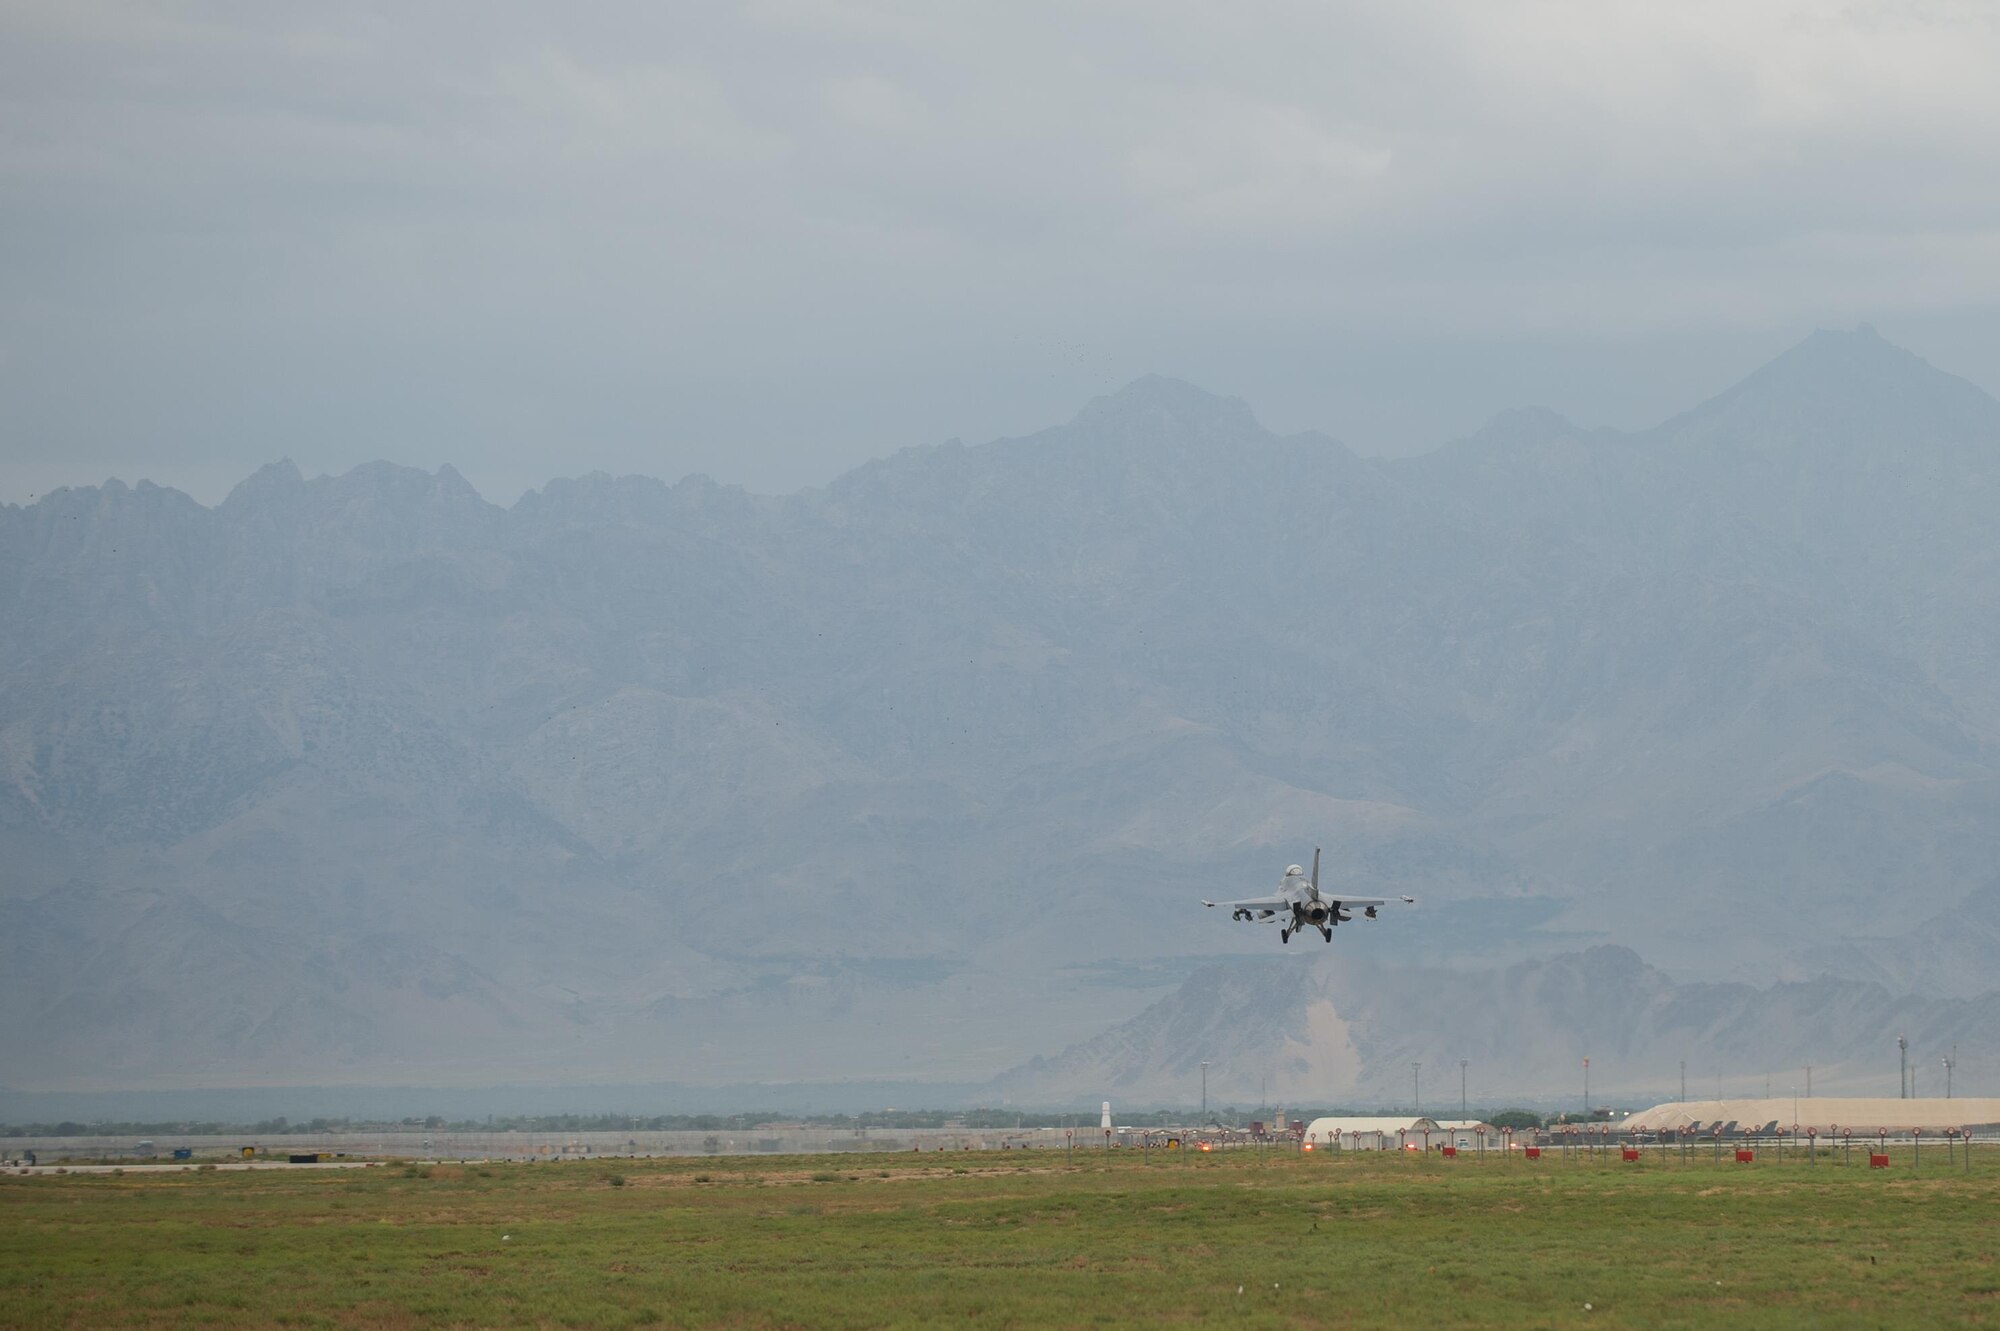 A U.S. Air Force F-16 Fighting Falcon “Triple Nickel” aircraft assigned to the 555th Expeditionary Fighter Squadron from Aviano Air Base, Italy, lands at Bagram Airfield, Afghanistan, July 29, 2015. The F-16 is a multi-role fighter aircraft that is highly maneuverable and has proven itself in air-to-air and air-to-ground combat. Members of the Triple Nickel are deployed in support of Operation Freedom’s Sentinel and NATO’s Resolute Support mission. (U.S. Air Force photo by Tech. Sgt. Joseph Swafford/Released)